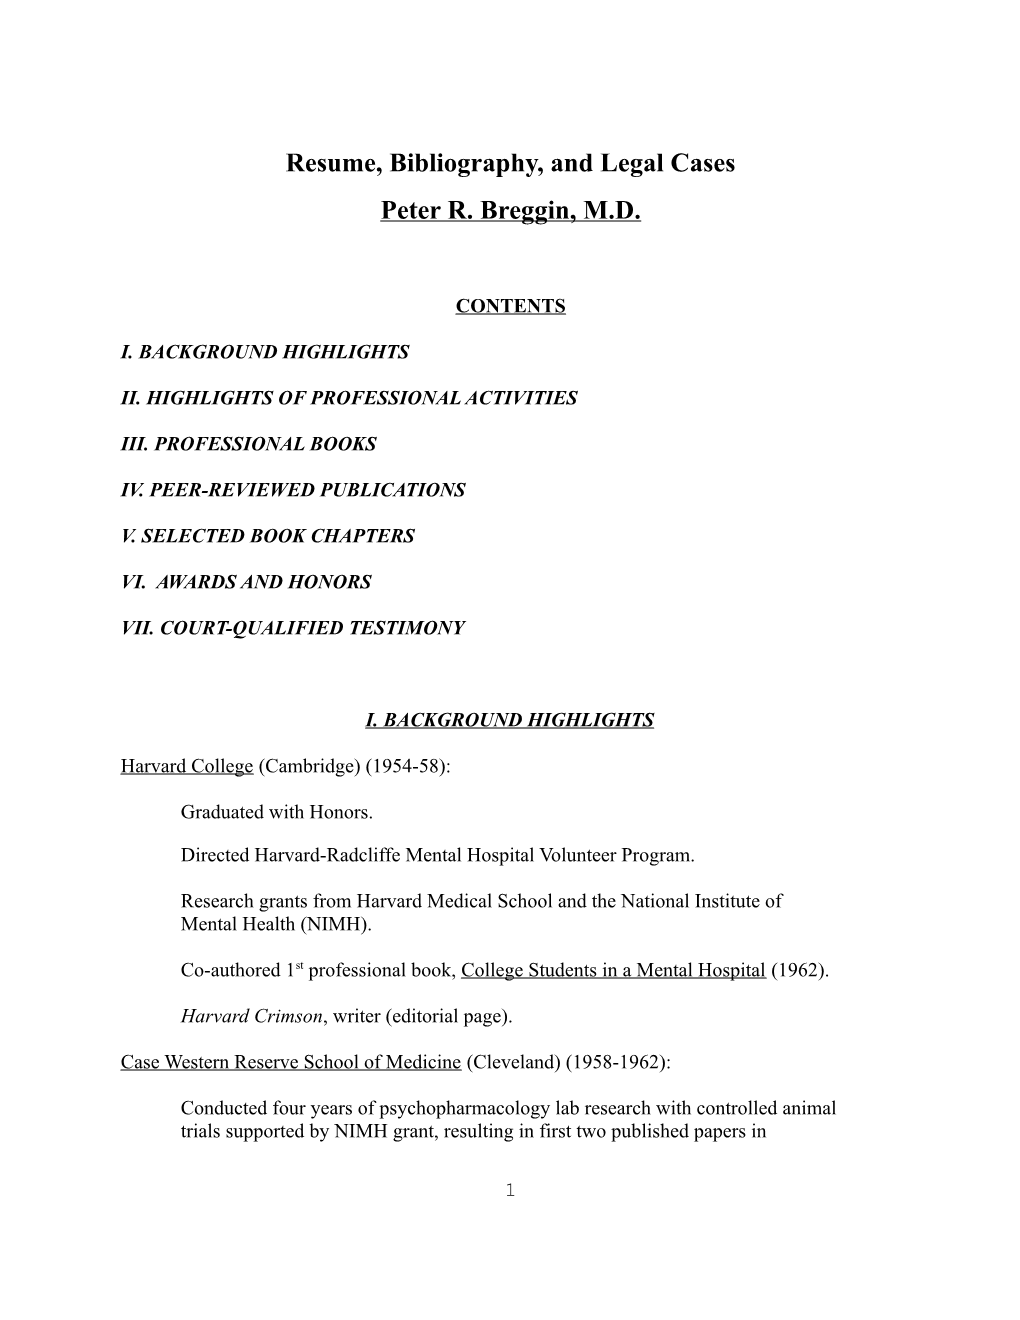 Resume, Bibliography, and Legal Cases Peter R. Breggin, M.D